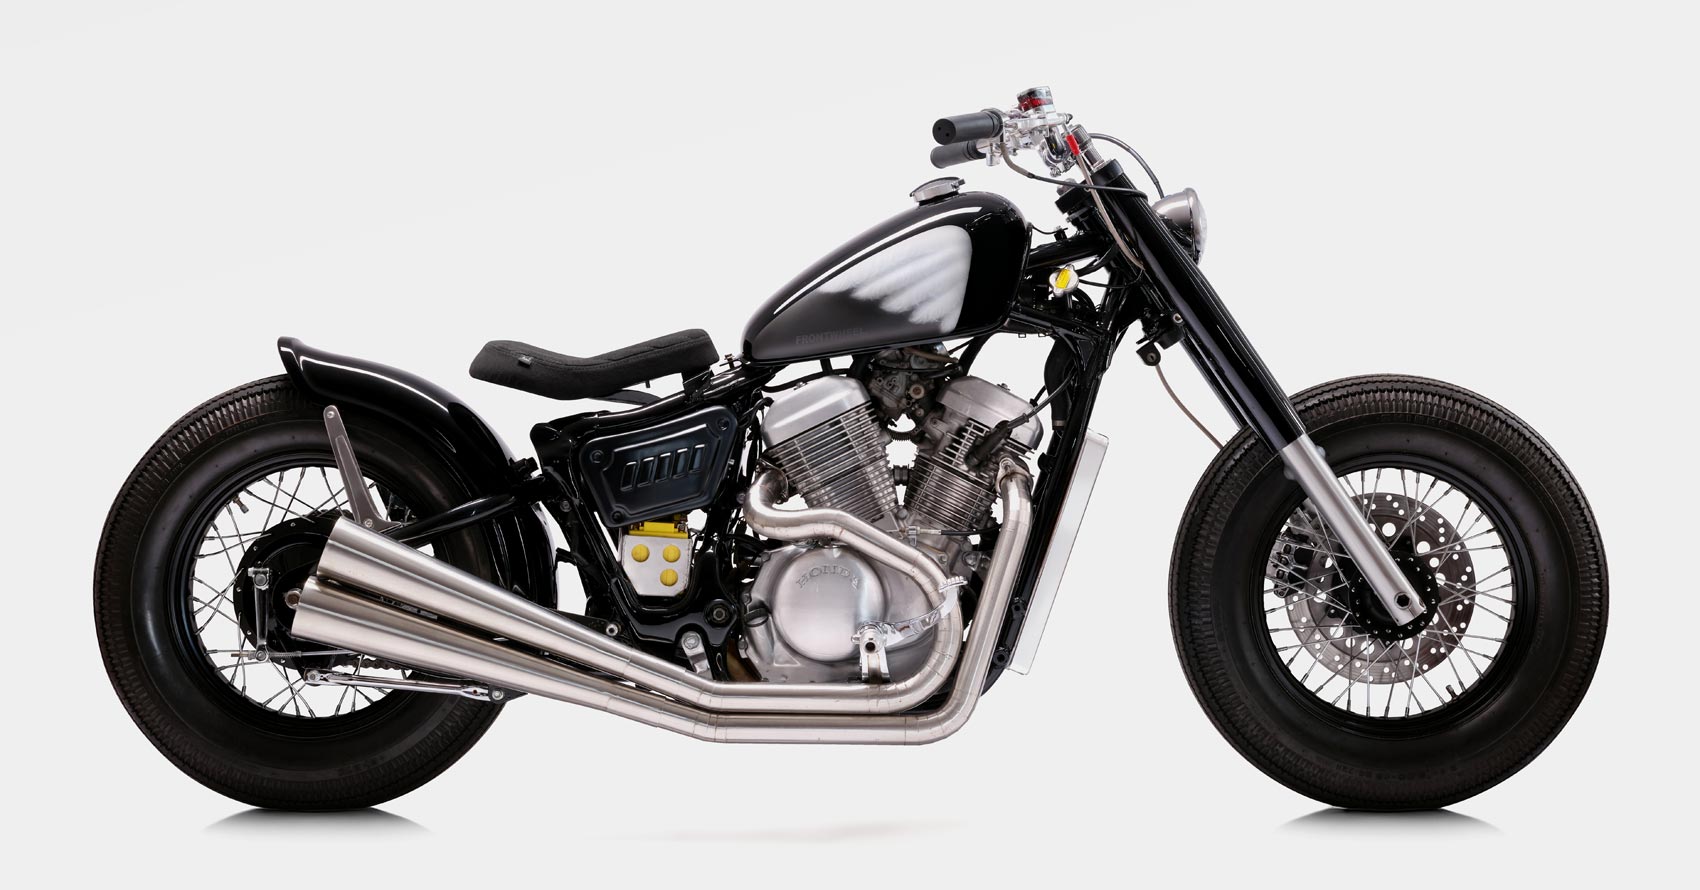 Black Steed: A delightful Honda Shadow bobber from Indonesia